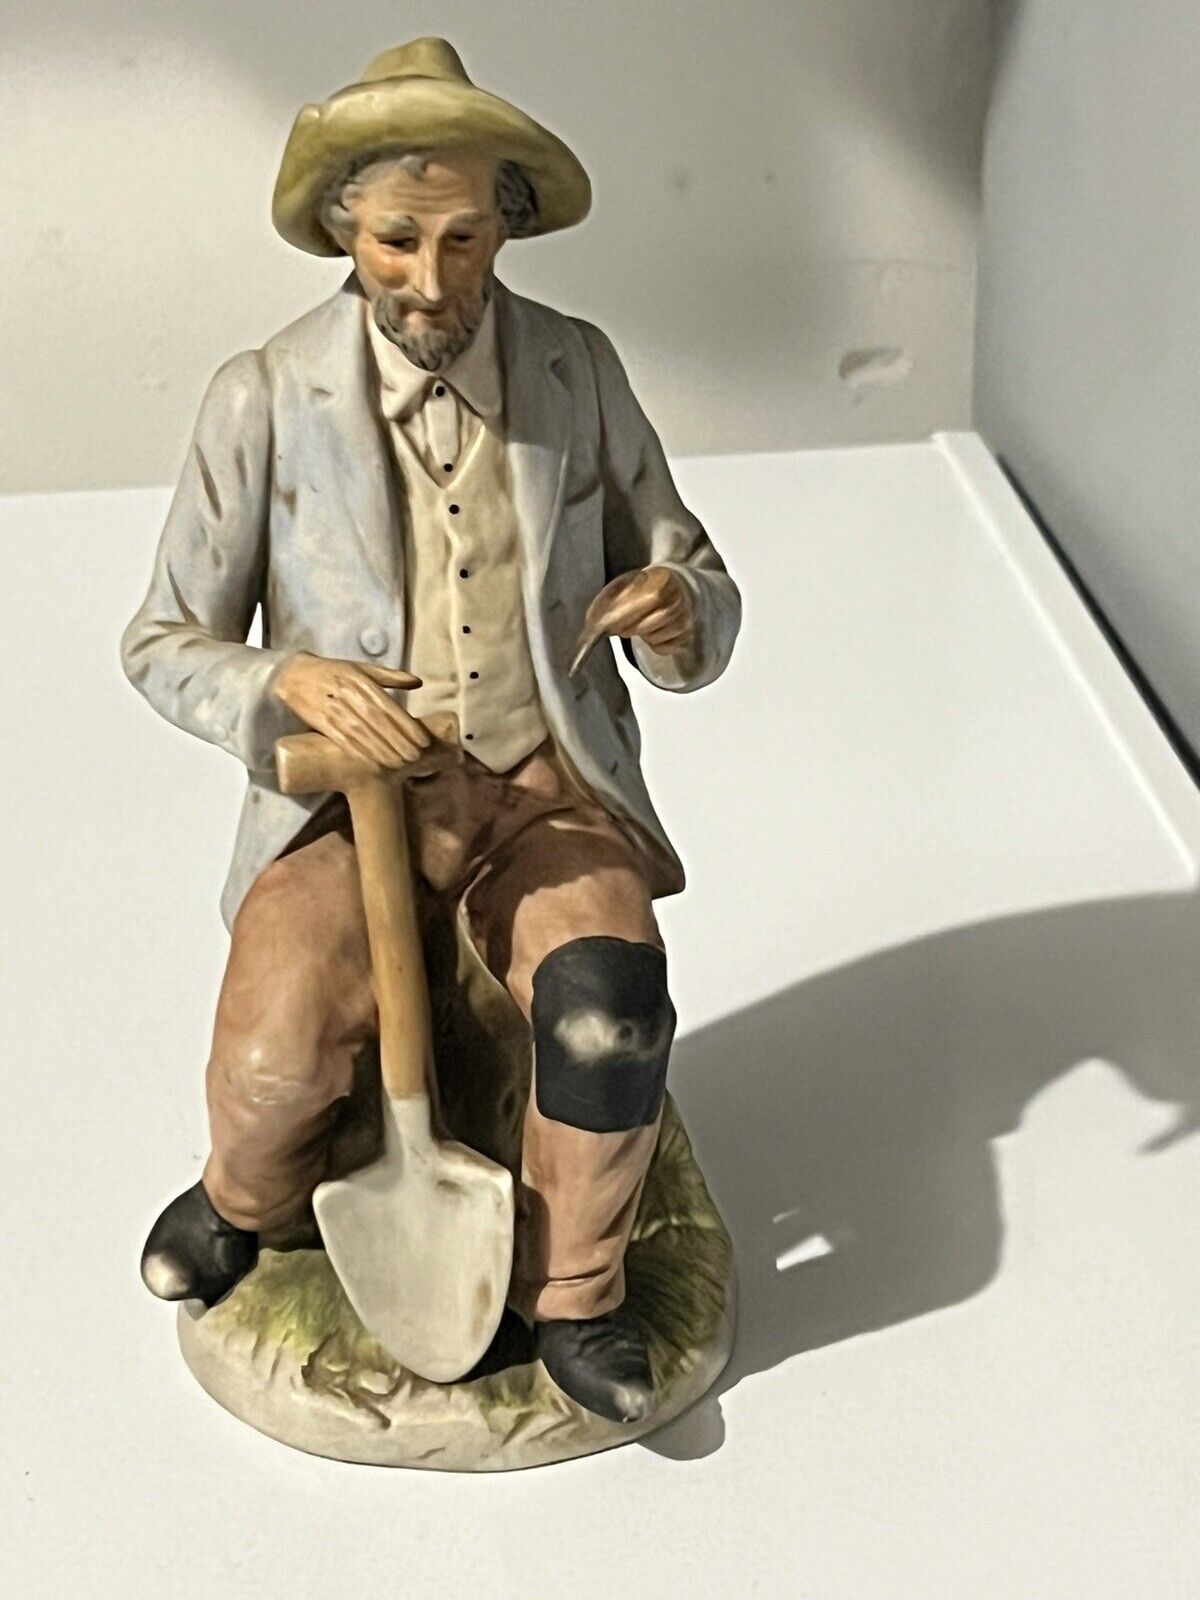 Homco 1433 Old World Farmers Man with Pipe Porcelain Figurine Home Interiors 8”